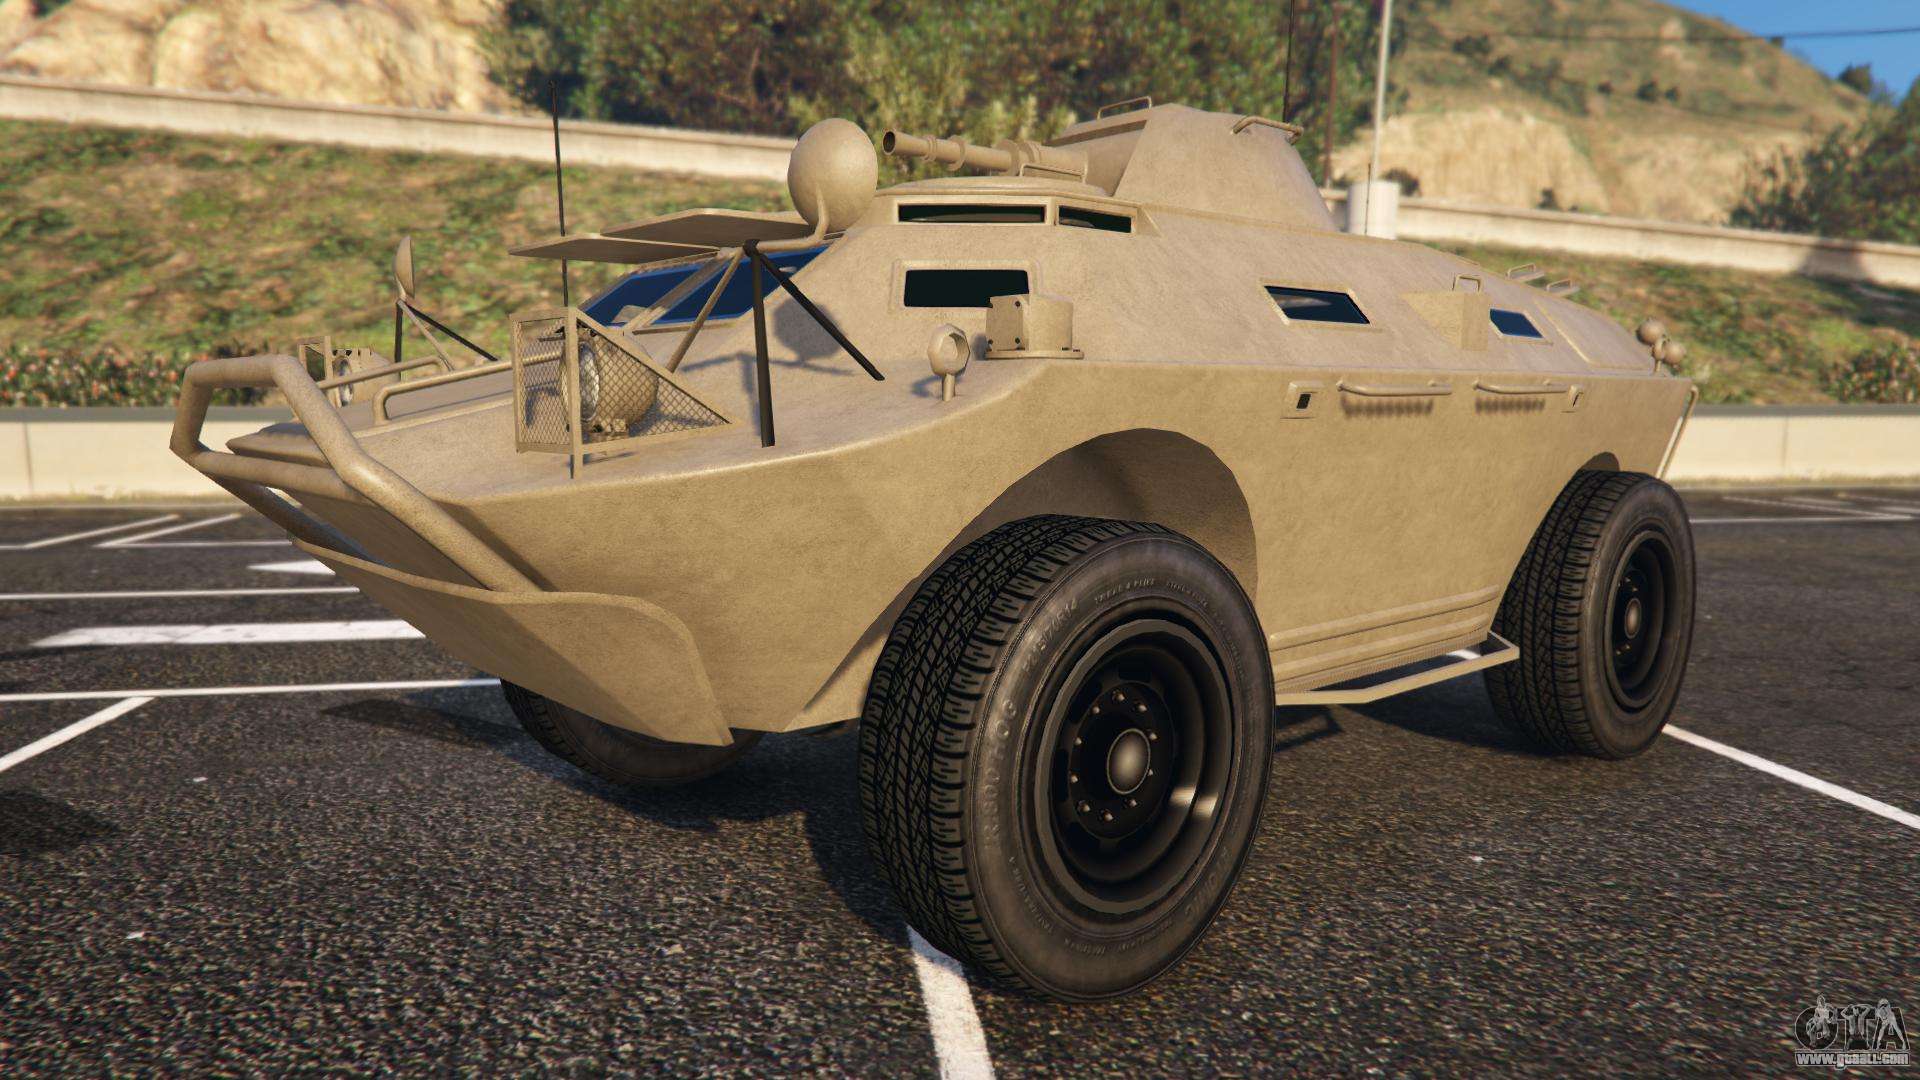 HVY APC from GTA 5  description with the features, screenshots and